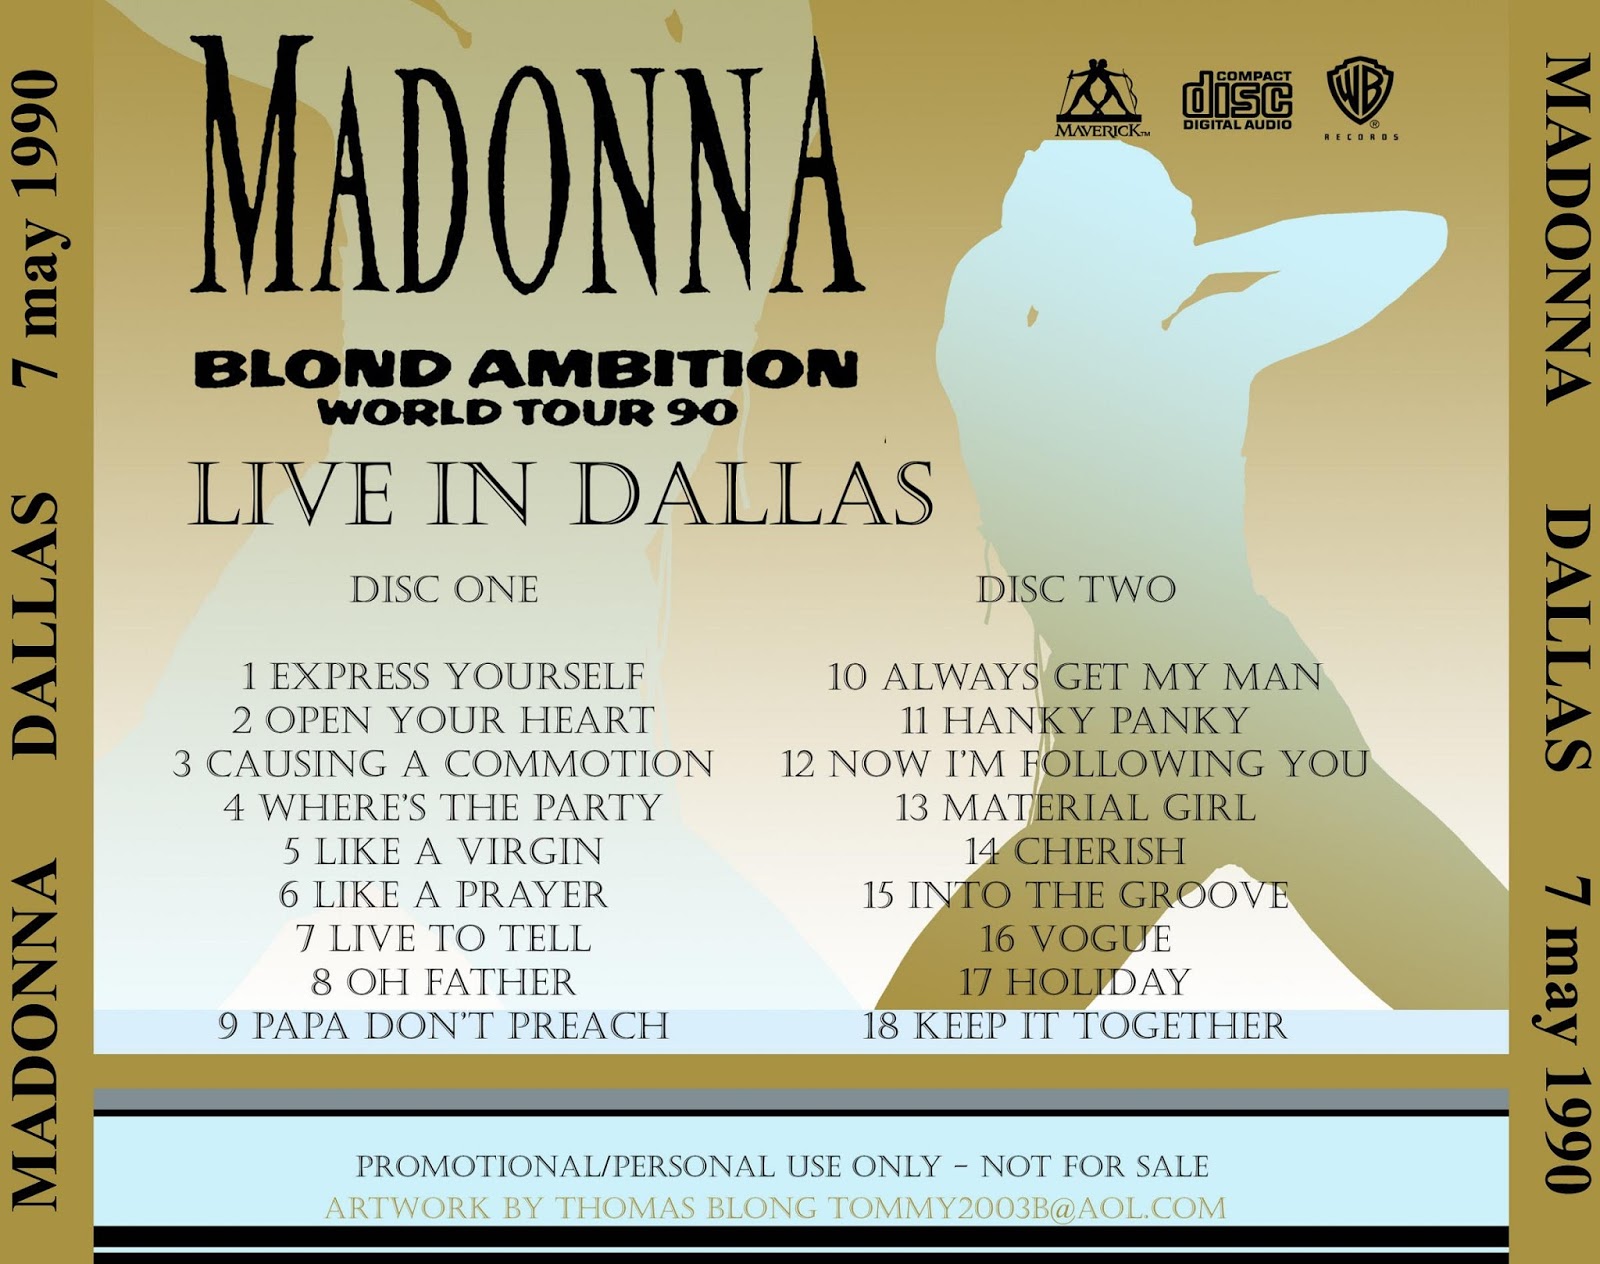 Madonna FanMade Covers Blond Ambition Tour Dallas, May 7th 1990